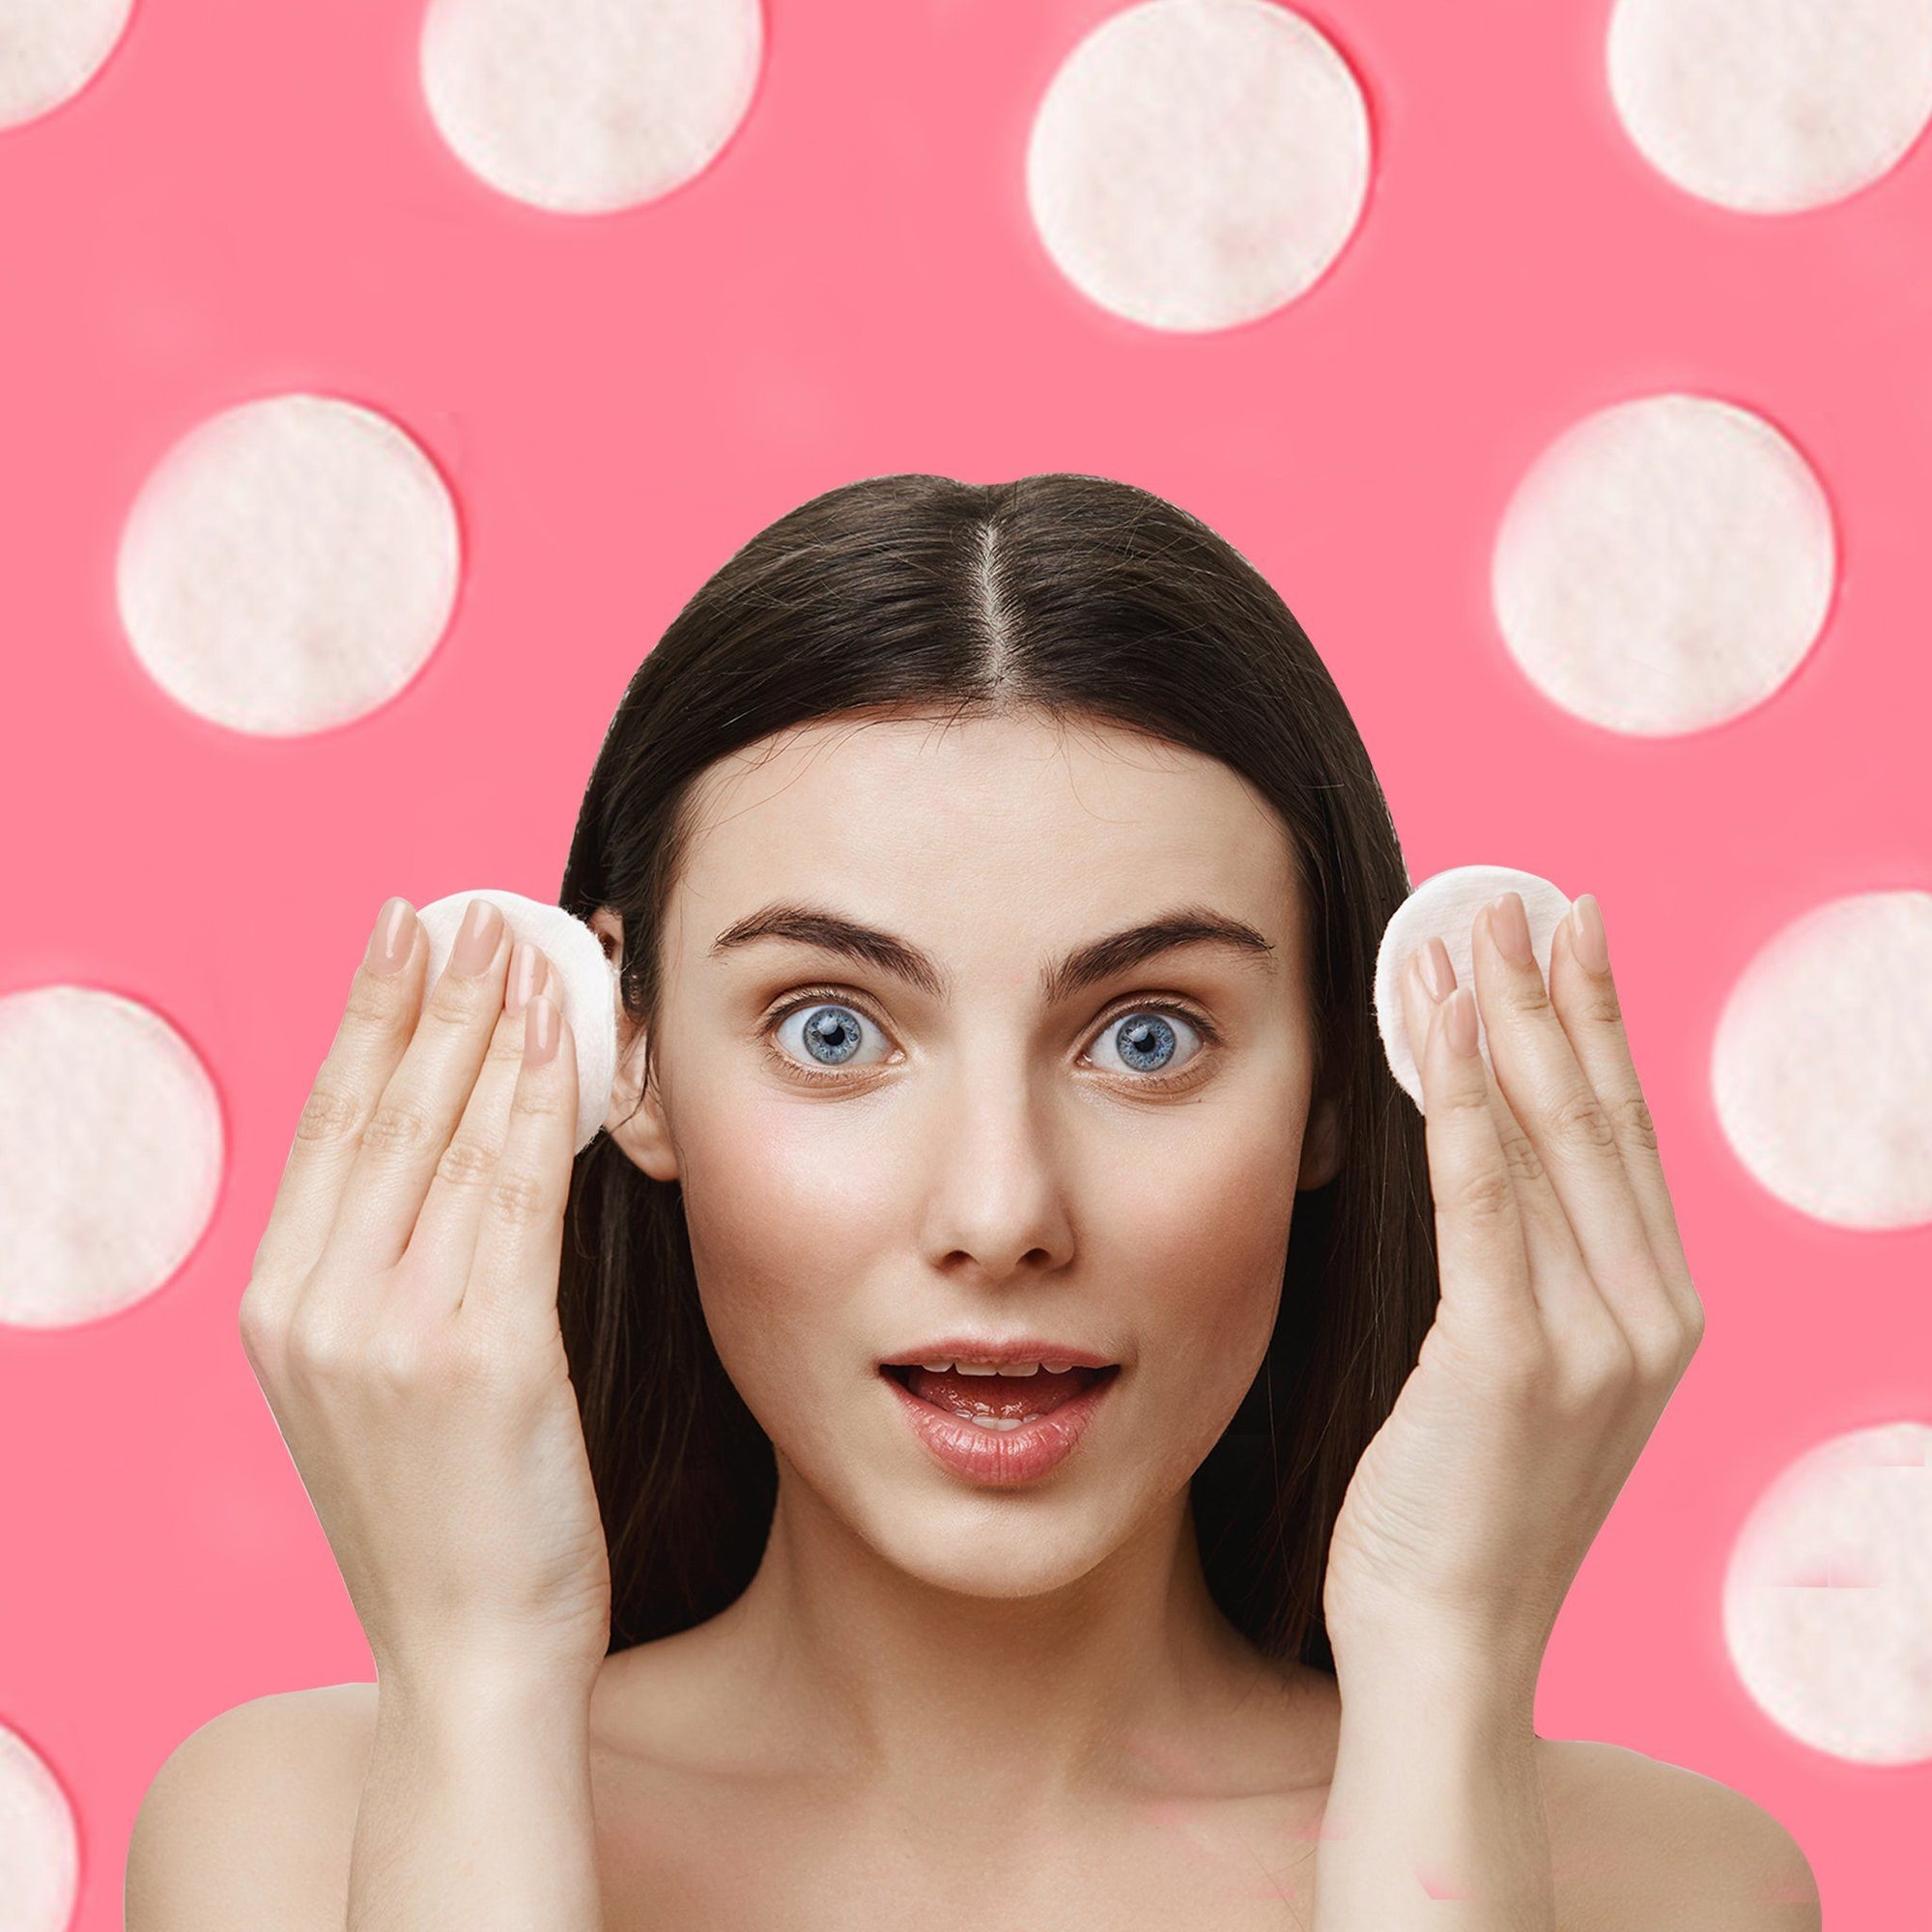 Do we millennials really need a toner in our skin care regimen?